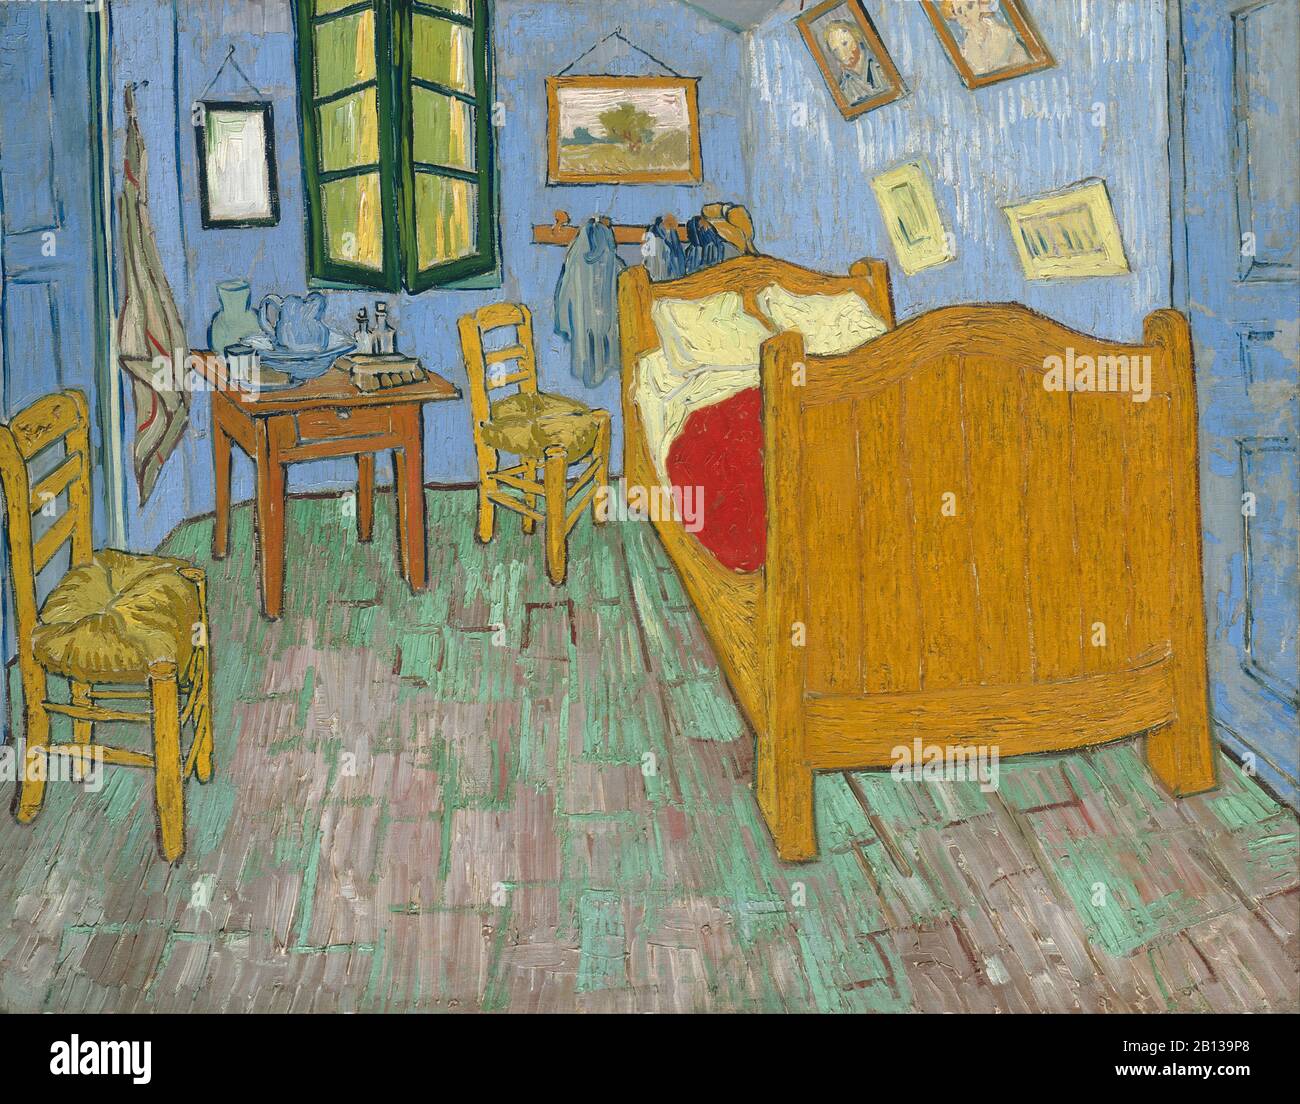 Van Gogh's Bedroom in Arles (The Bedroom), second (2nd) version, September 1889 Vincent van Gogh painting - Very high resolution and quality image Stock Photo